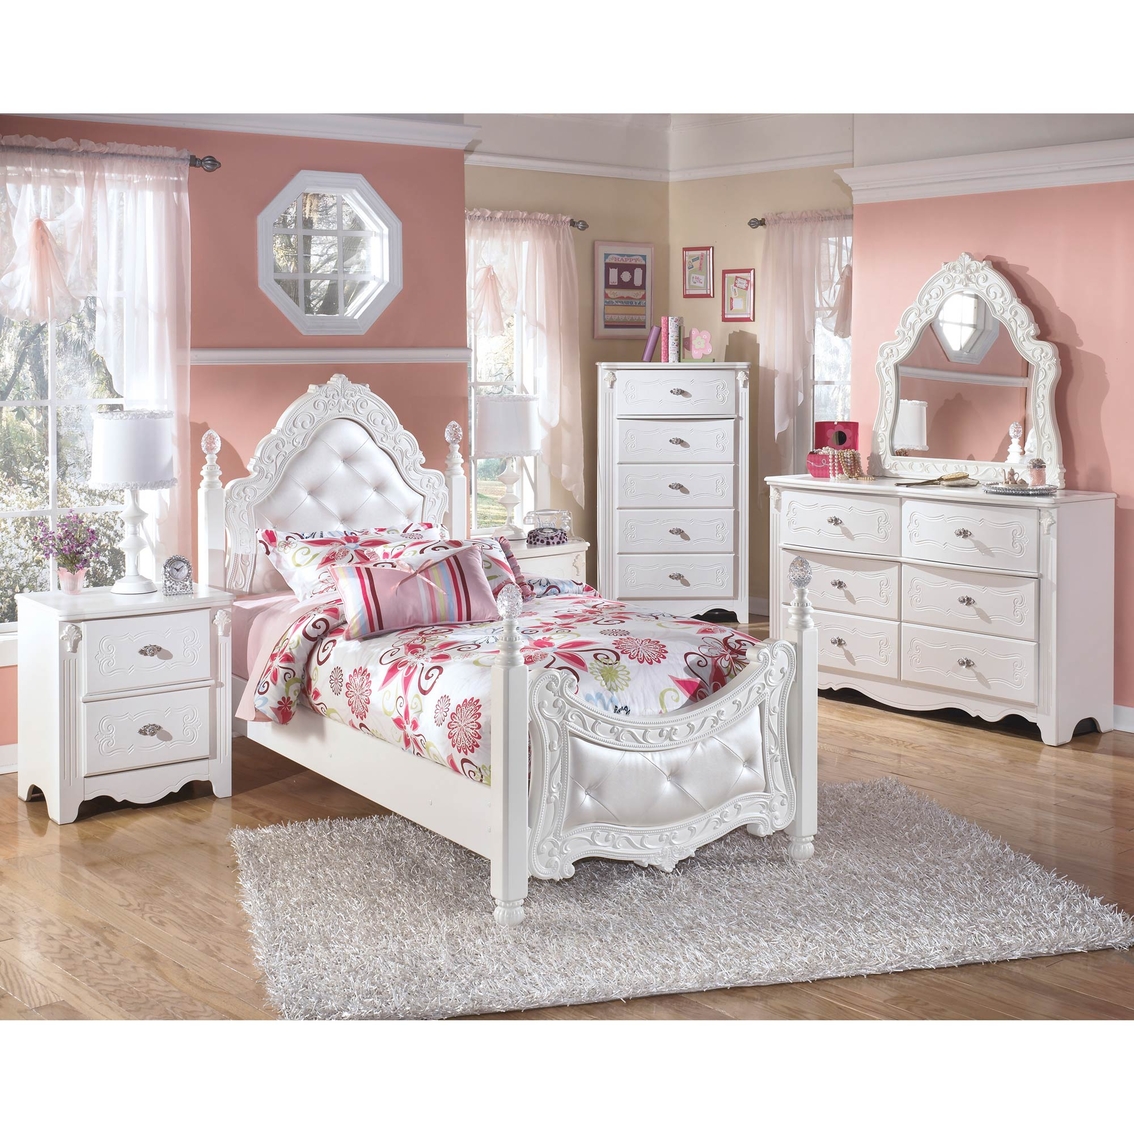 Signature Design by Ashley Exquisite Poster Bed - Image 2 of 3